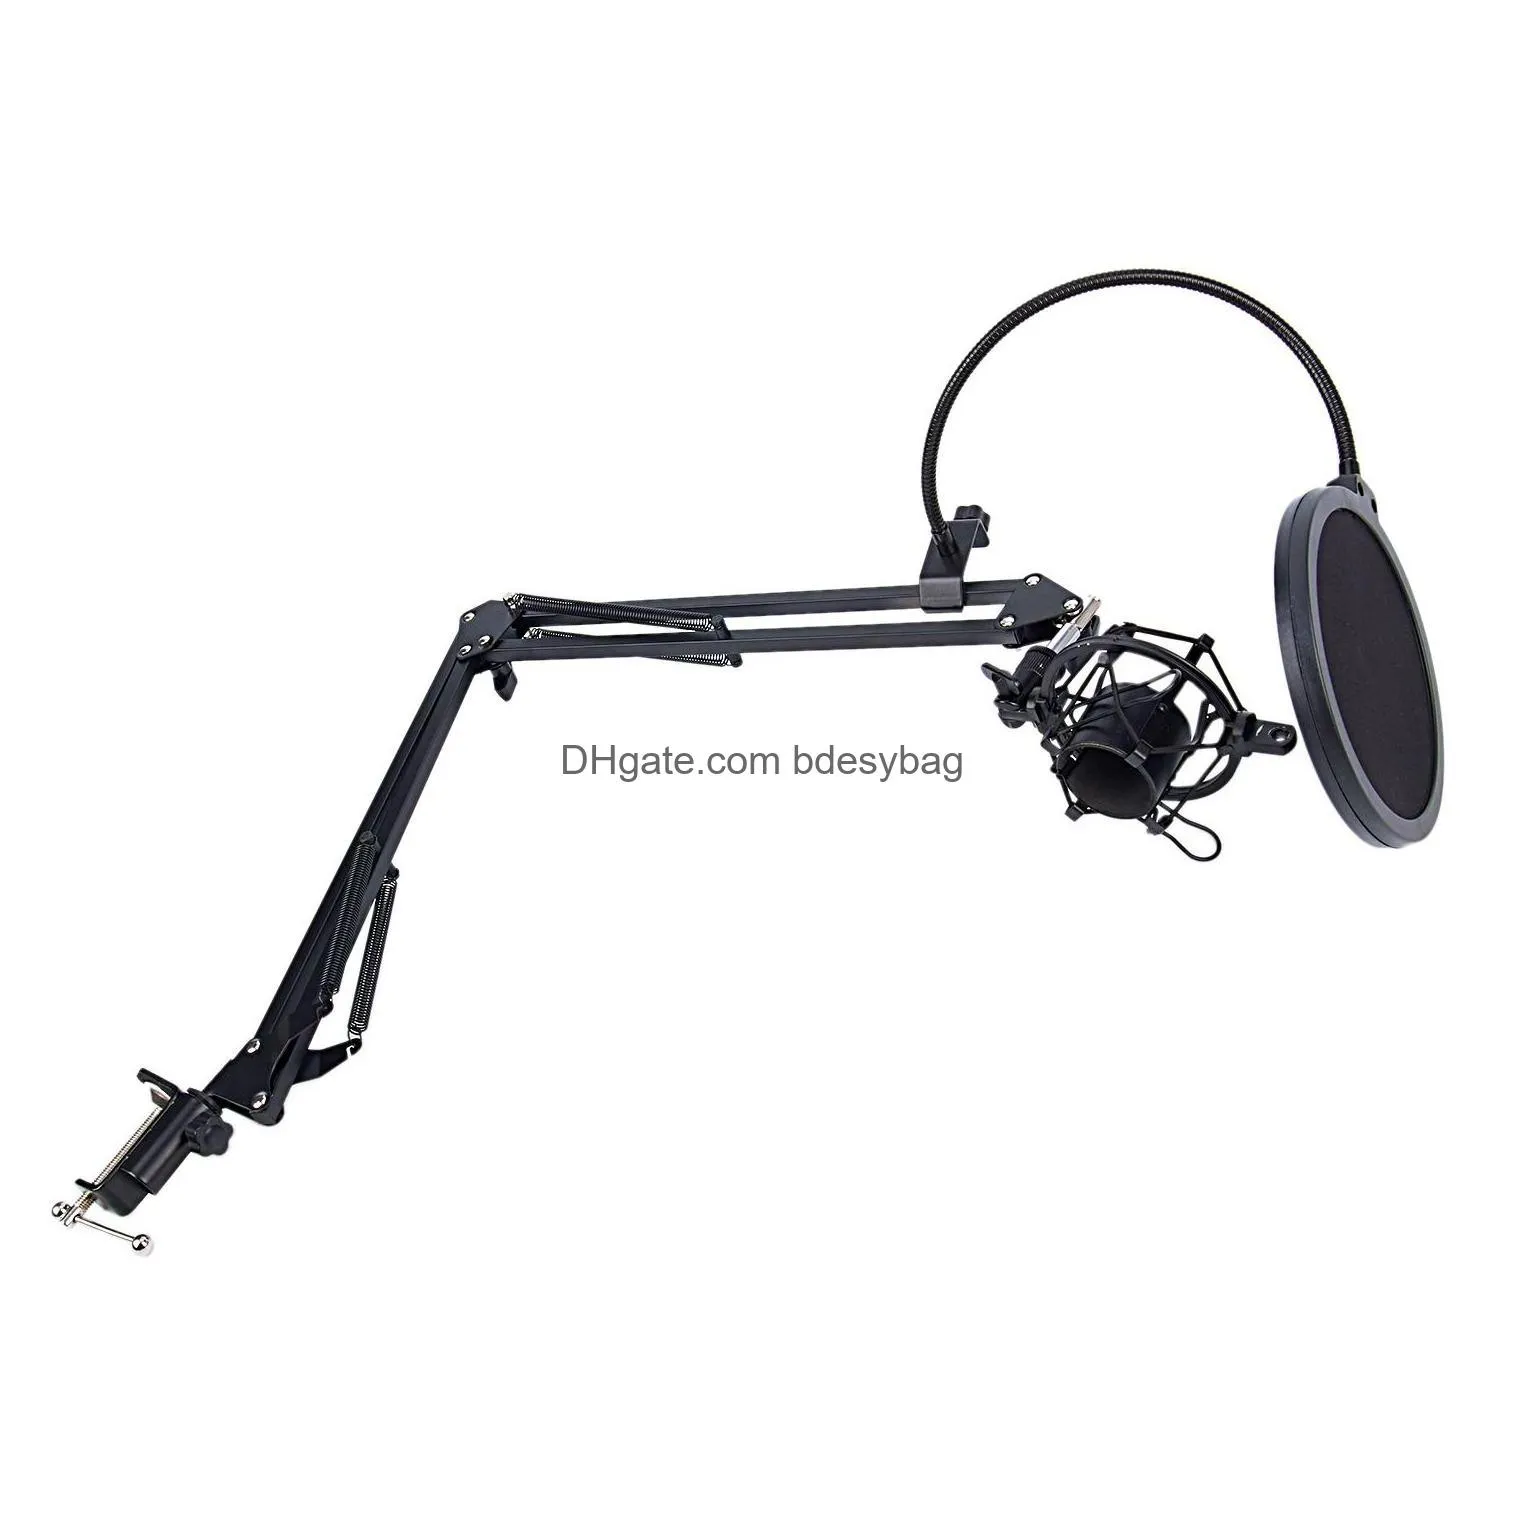 nb-35 microphone scissor arm stand and table mounting clamp&nw filter windscreen shield & metal mount kit